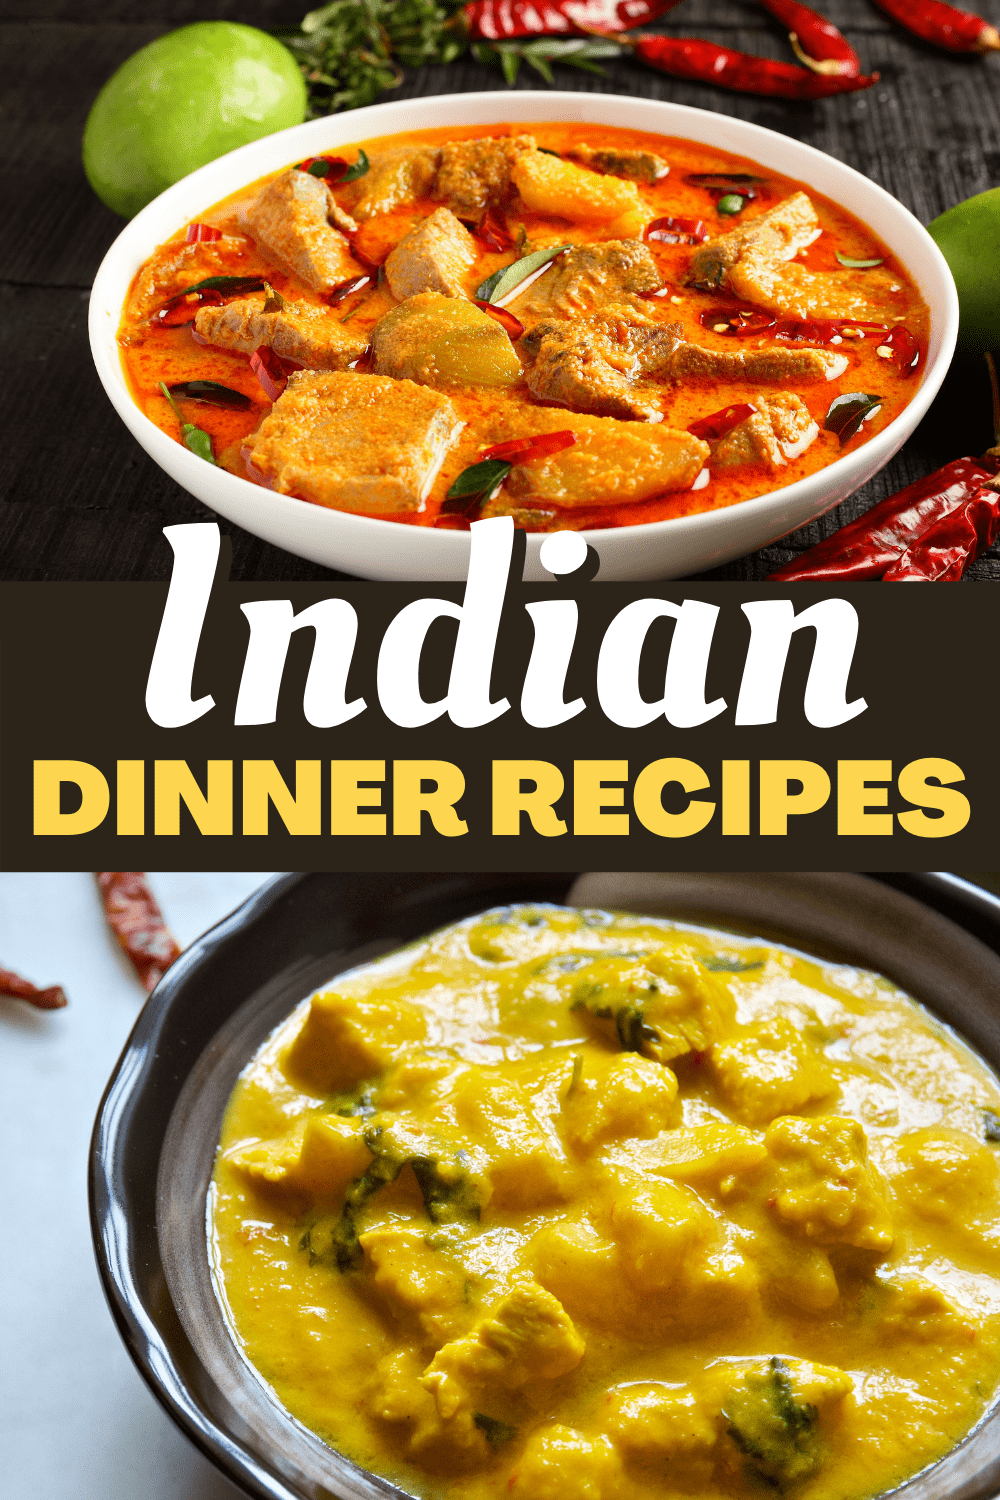 24 Indian Recipes Easy Dinner Ideas Insanely Good